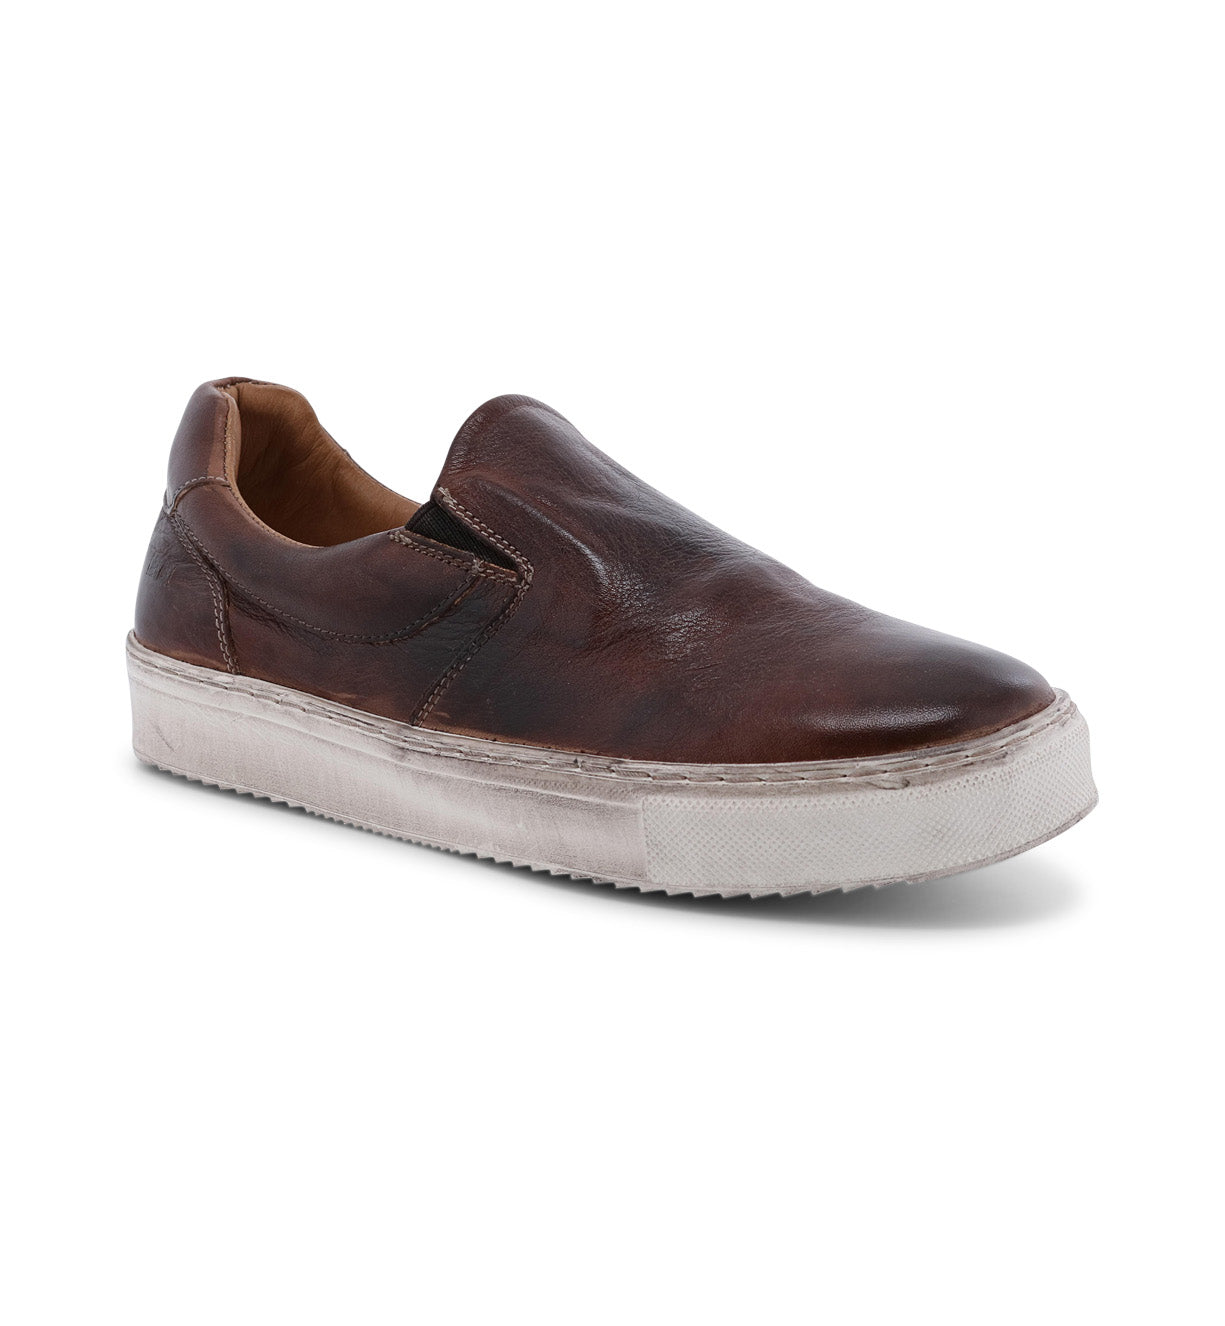 Women's brown leather slip on sneakers called Hermione by Bed Stu.